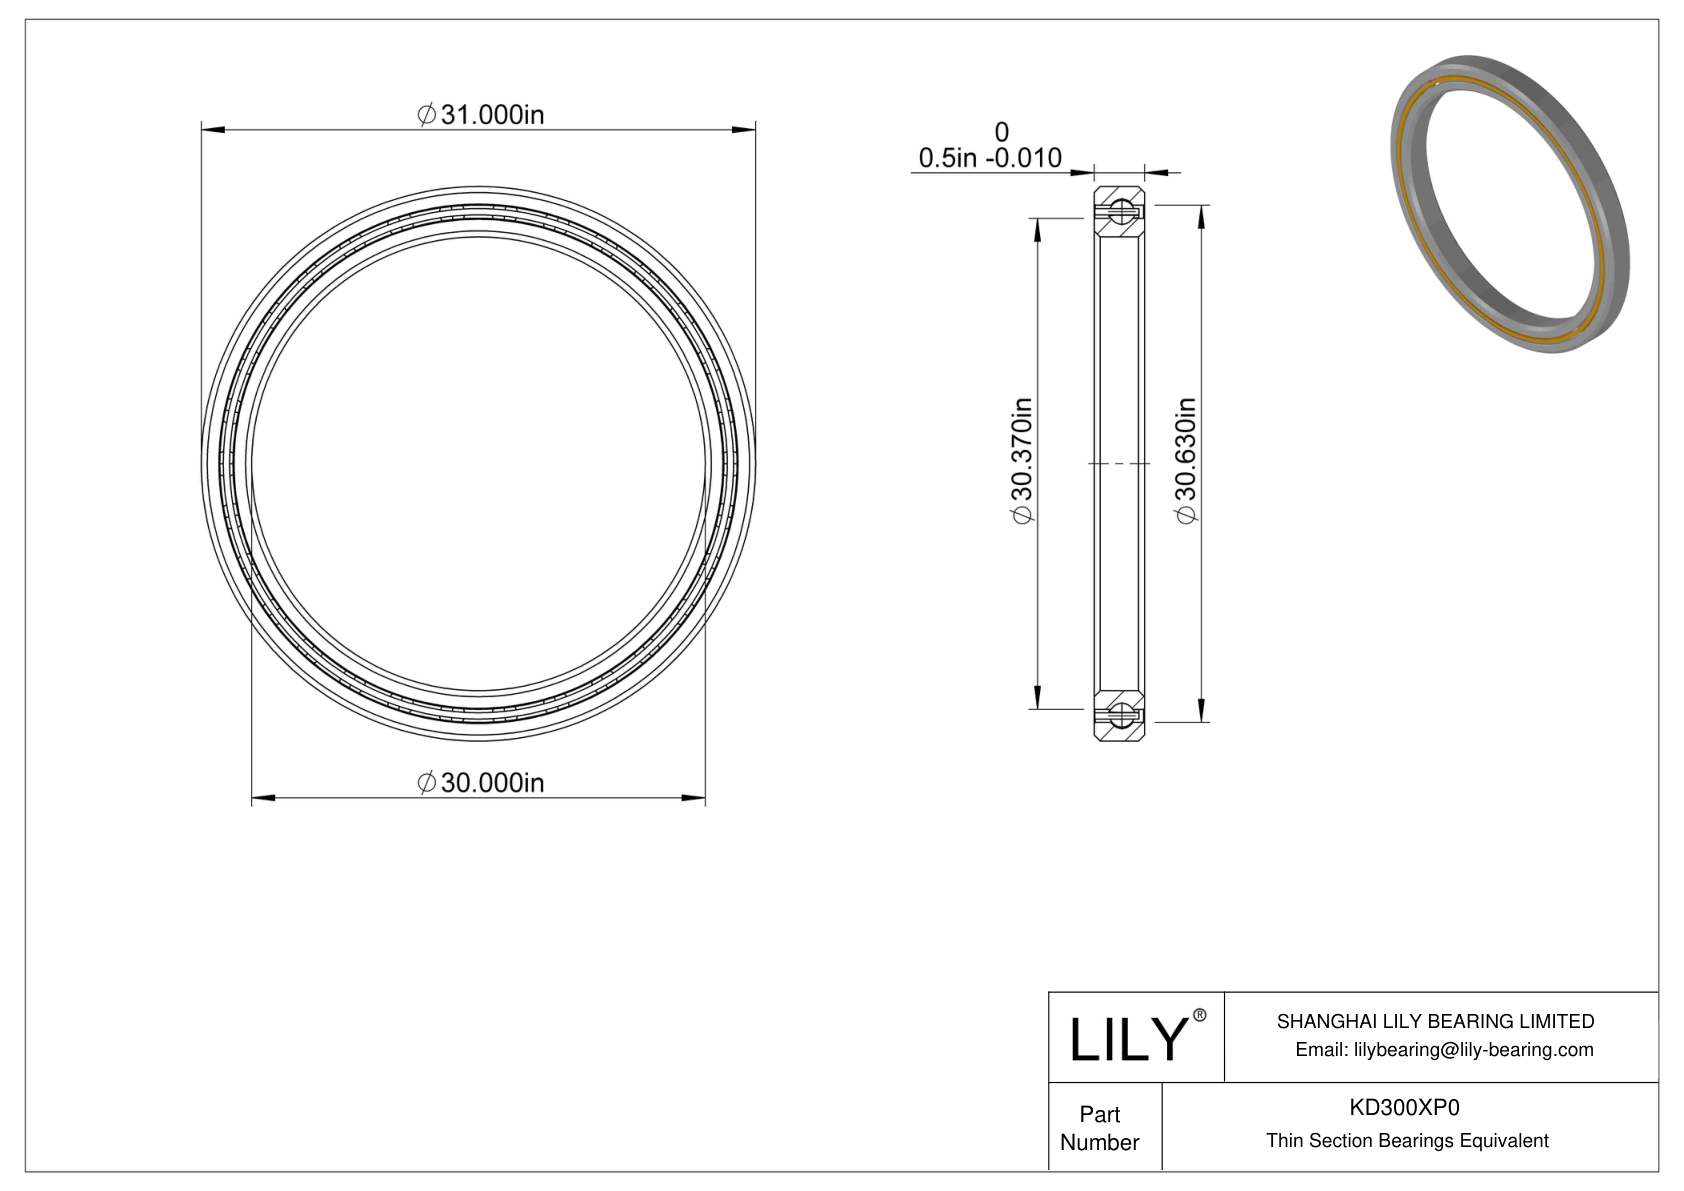 KD300XP0 Constant Section (CS) Bearings cad drawing